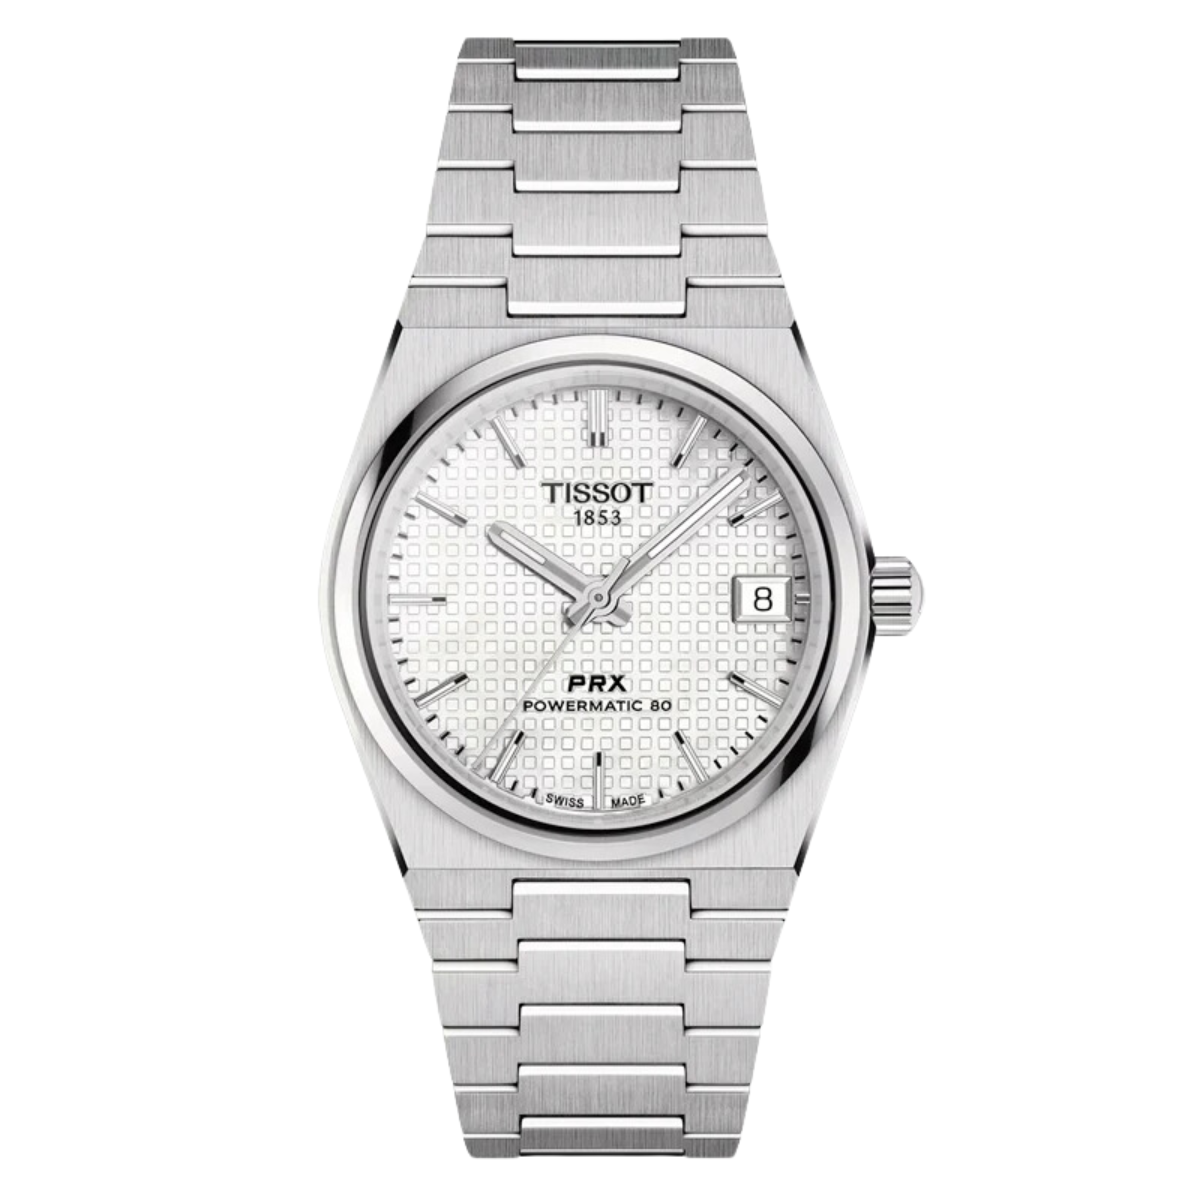 Tissot PRX Automatic Unisex T137.207.11.111.00 T1372071111100 White MOP Dial Watch - Skywatches